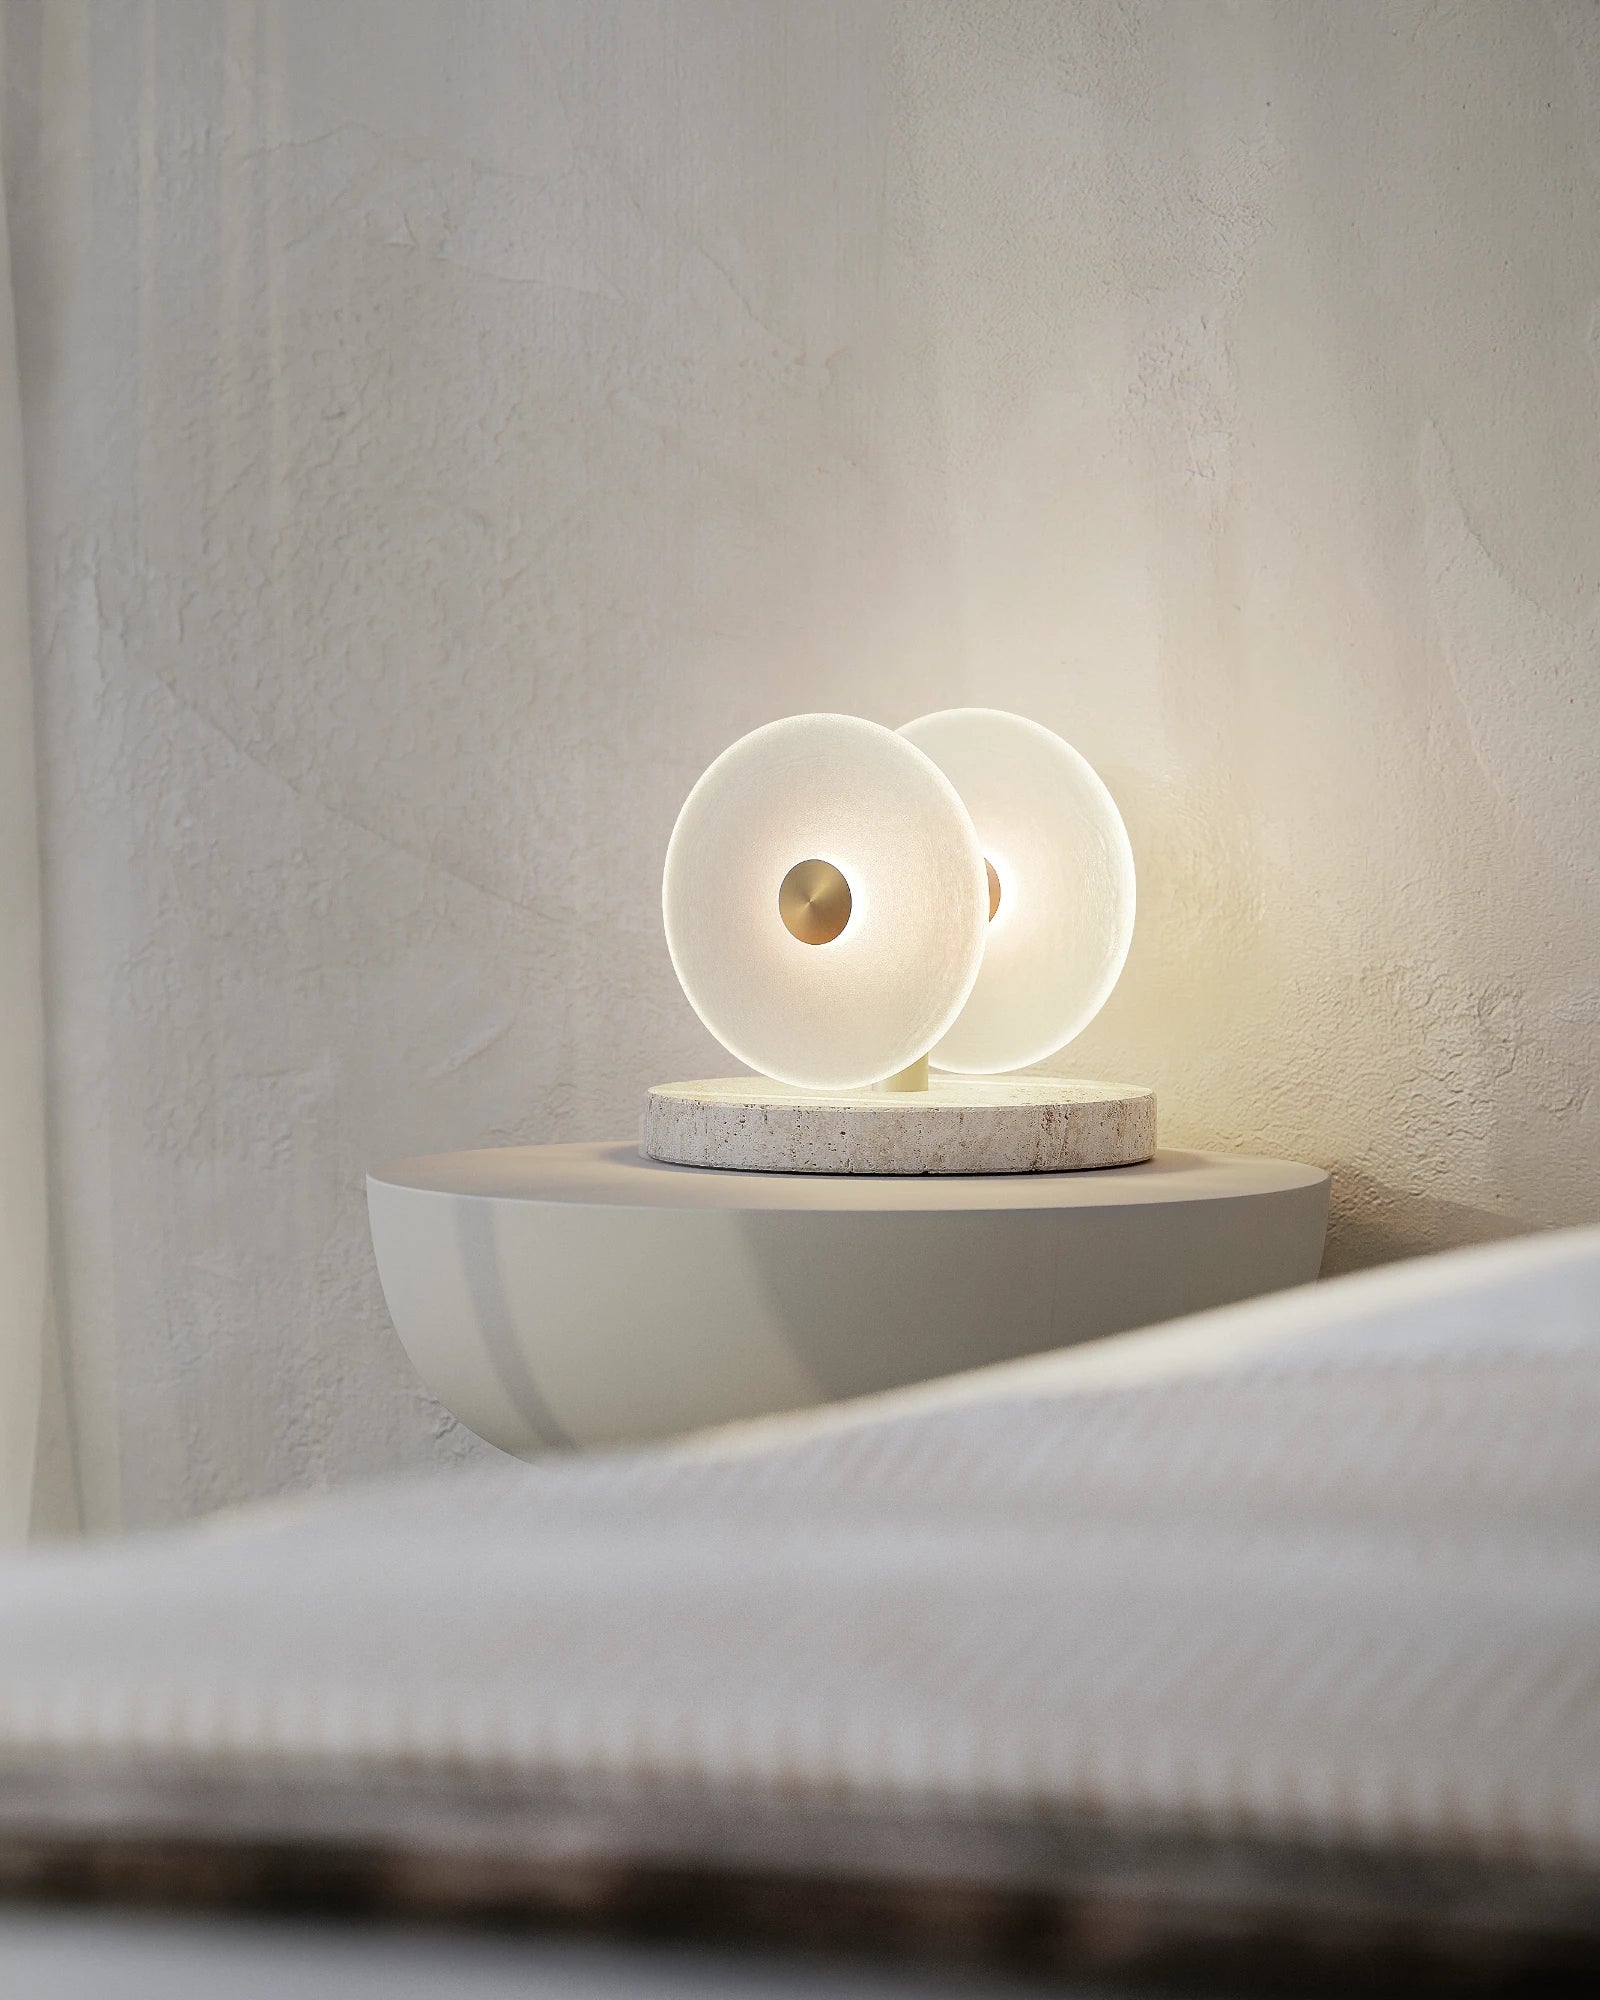 Coral Table Lamp